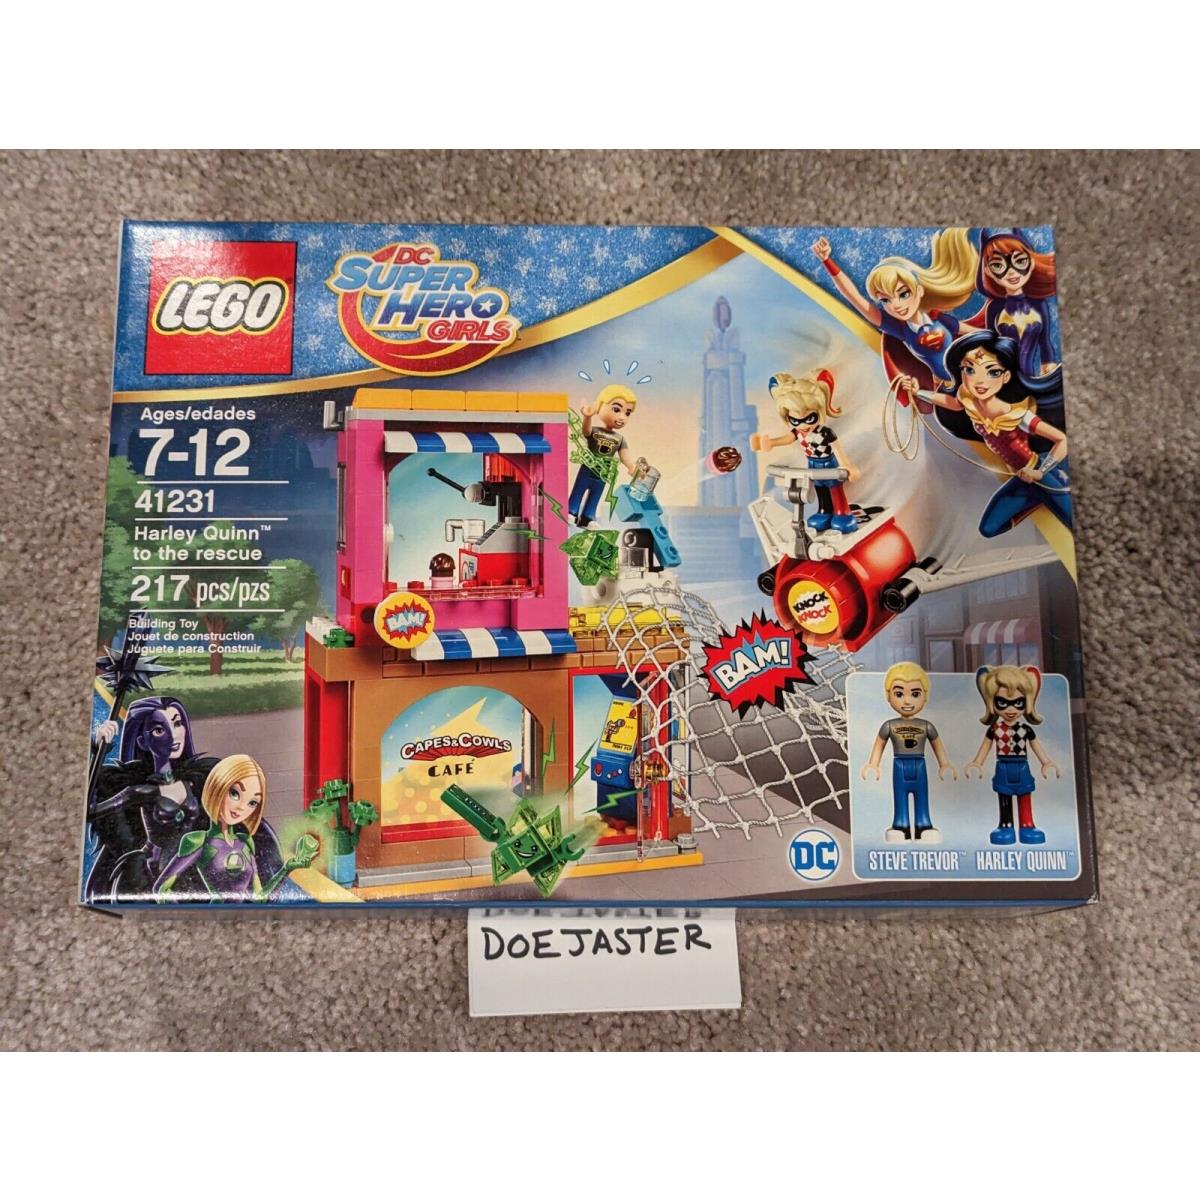 Lego 41231 Harley Quinn to The Rescue - -2017 - DC Super Hero Girls